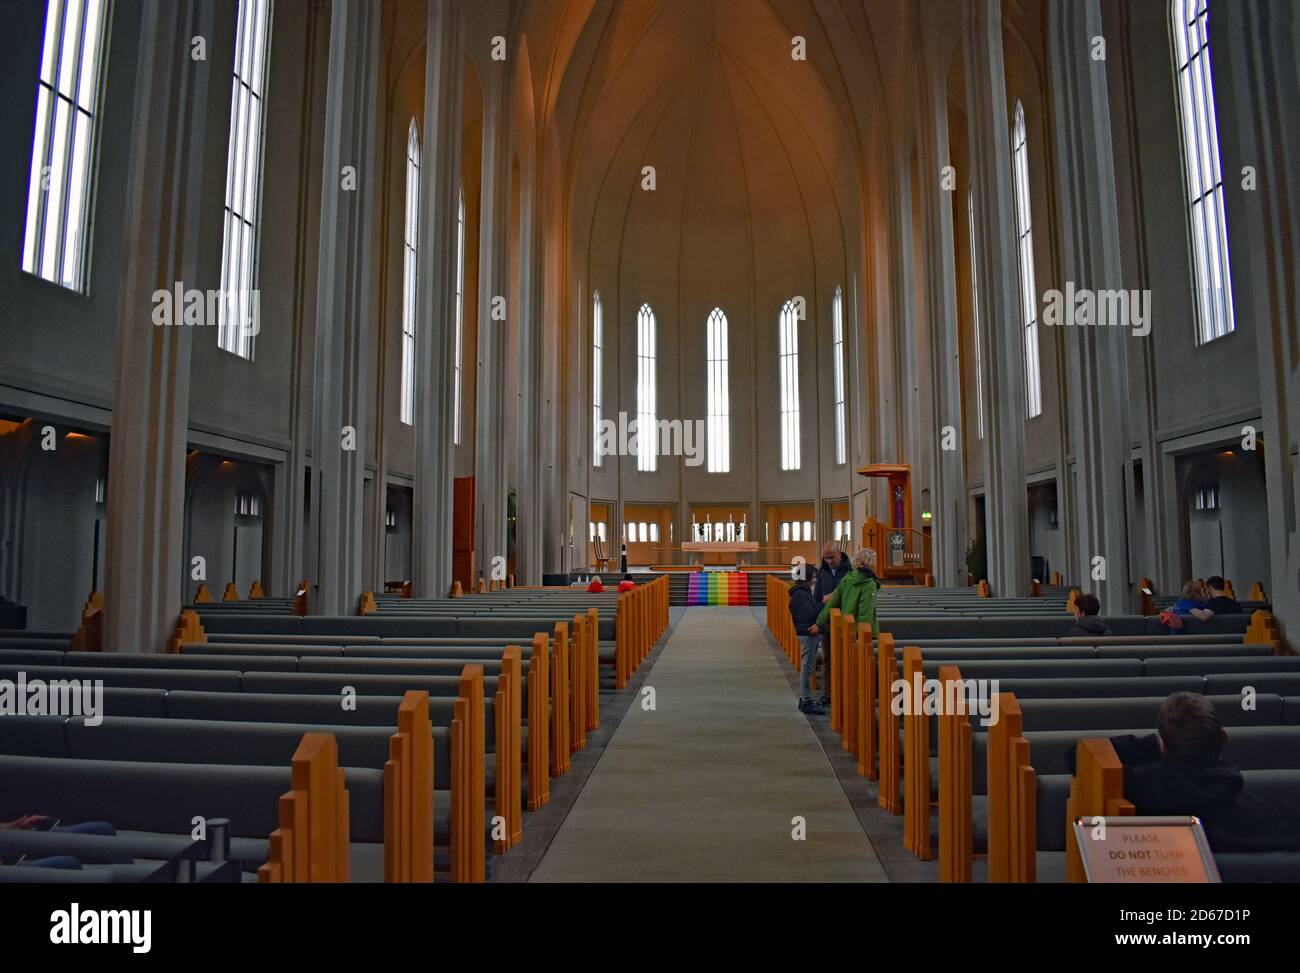 The interior of Hallgrimskirkja Church in Reykjavik. Iceland.  The alter can be seen displaying a rainbow flag (gay pride) and visitors gather inside. Stock Photo